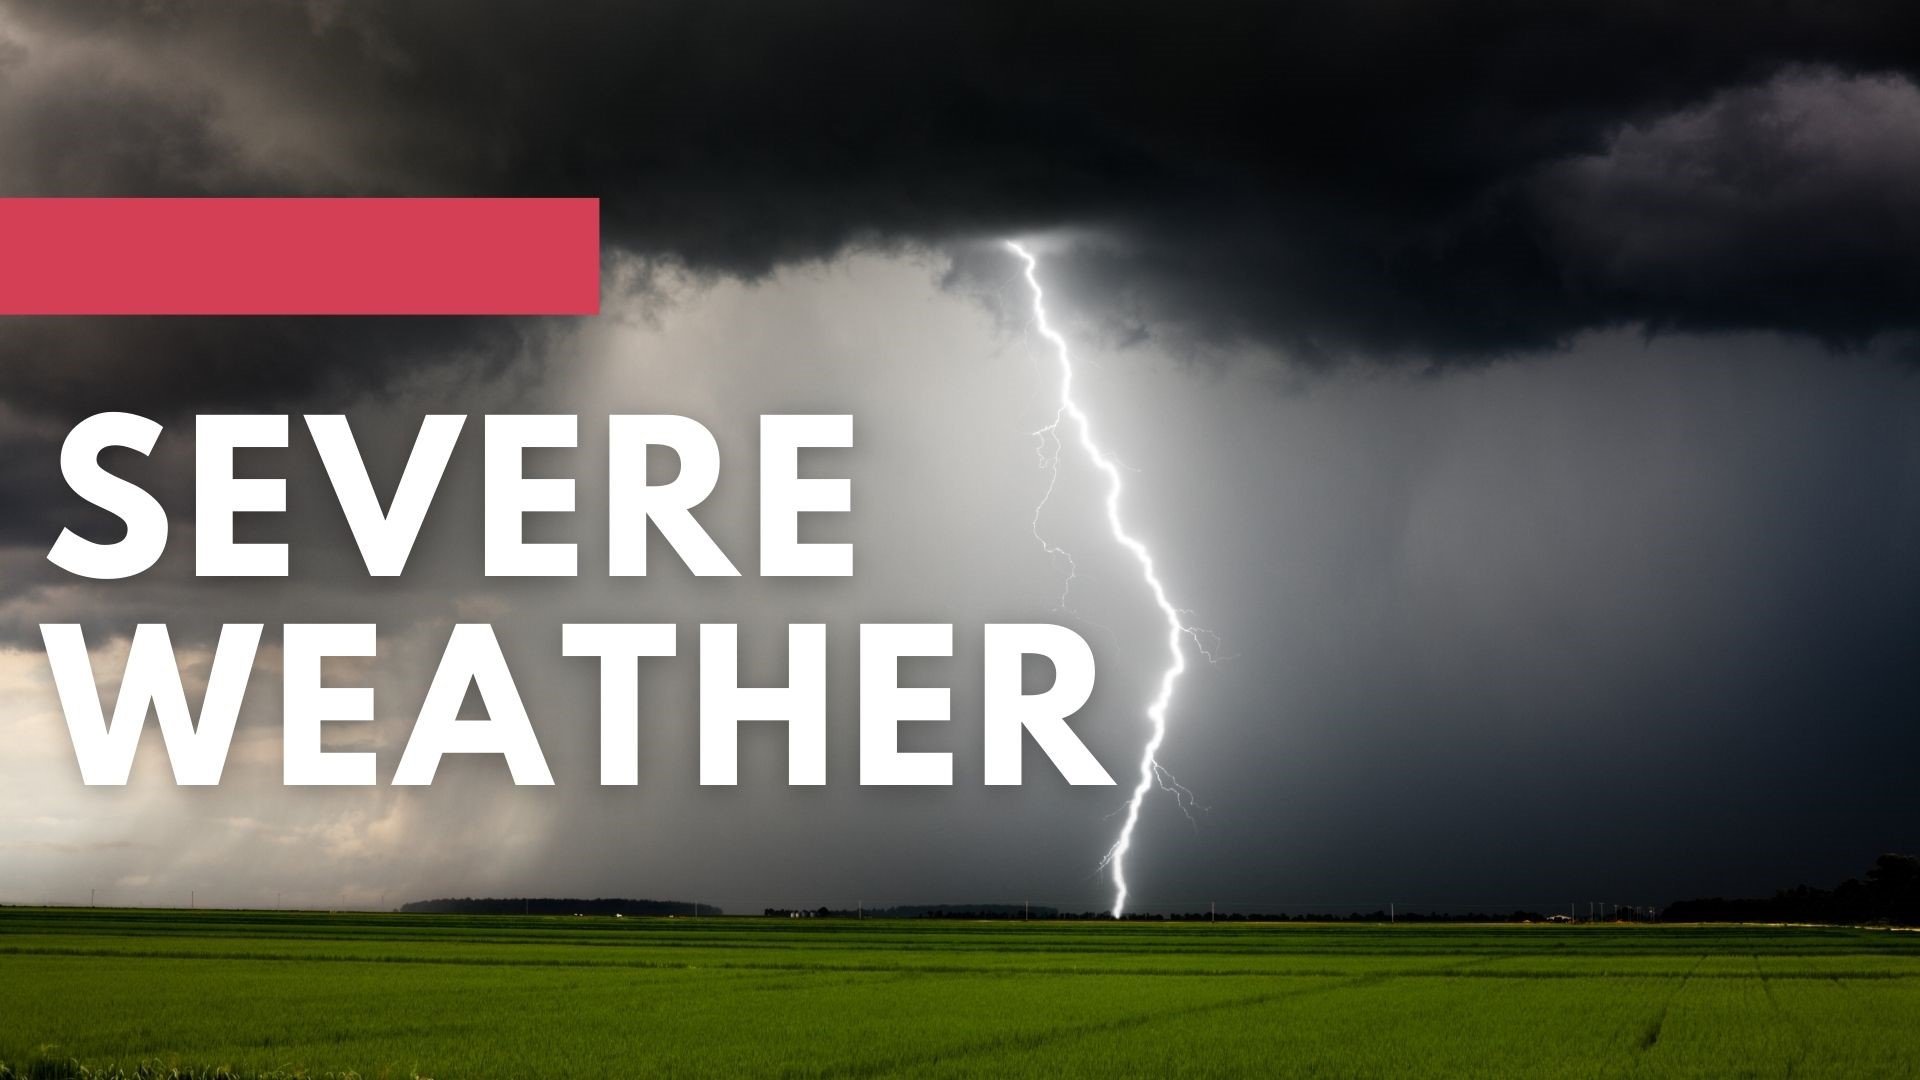 Severe weather can hit at anytime, so it is important to have a plan and be prepared. Here are safety tips for tornadoes, storms and more.